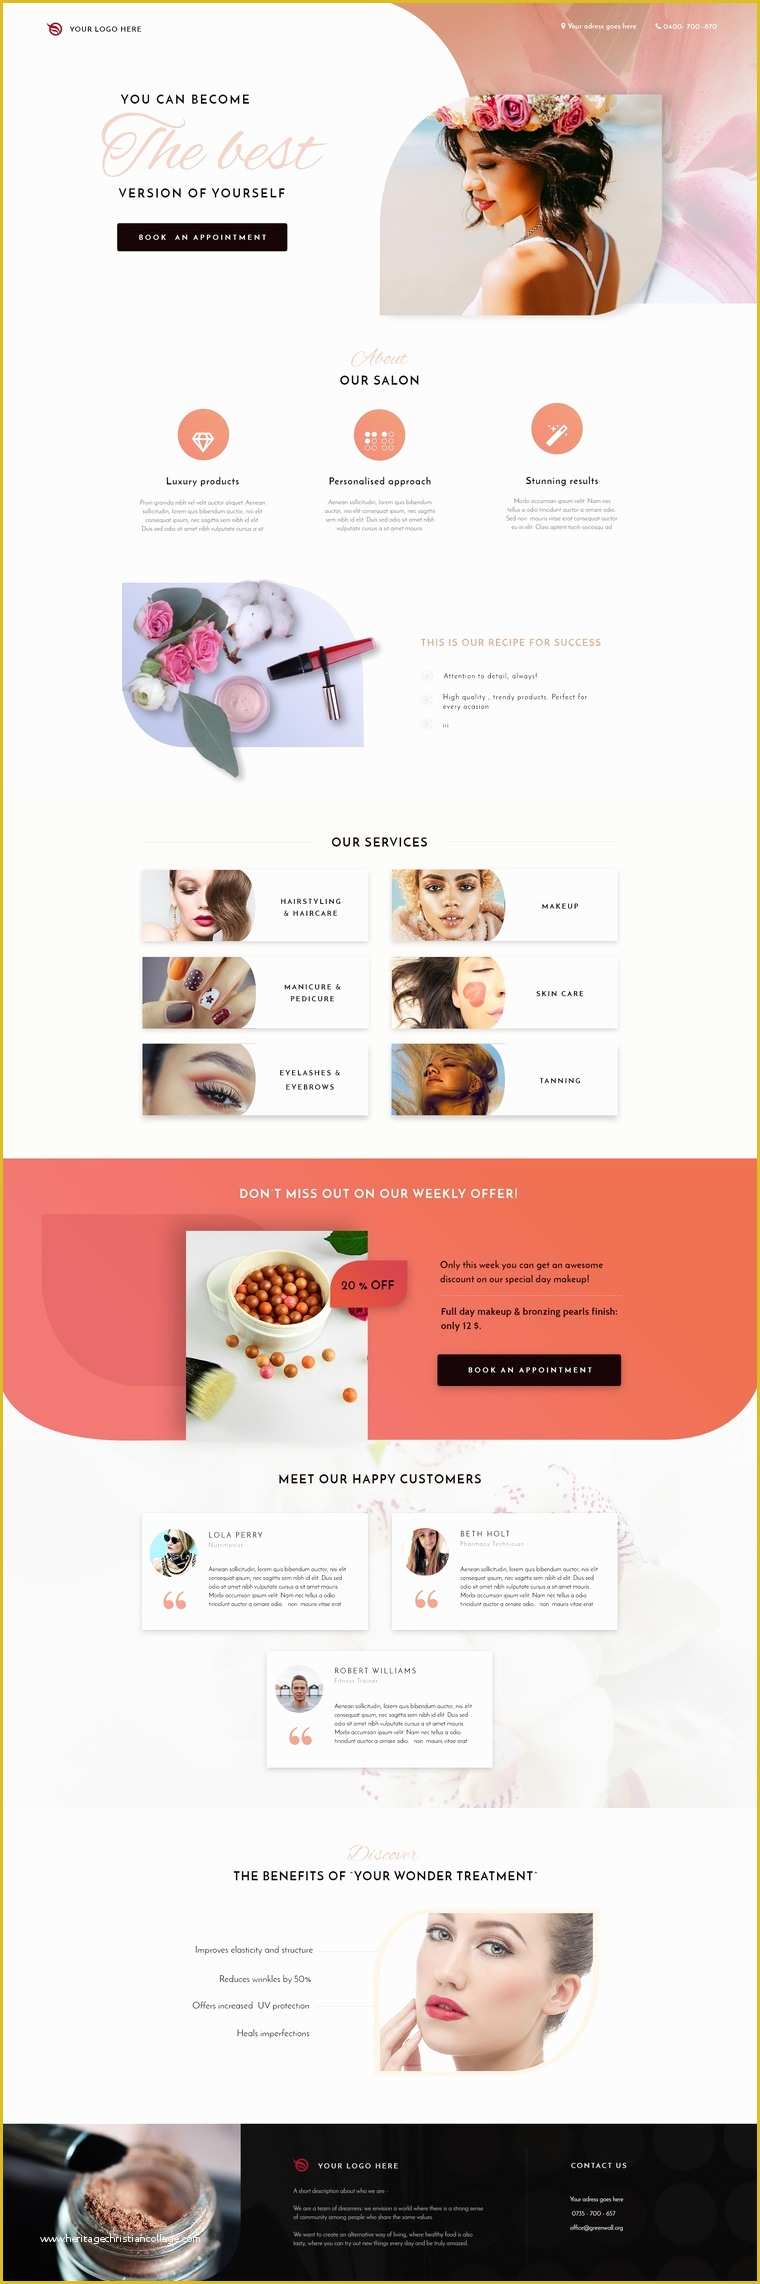 Free Business Landing Page Templates Of 3 New Local Business Landing Page Templates